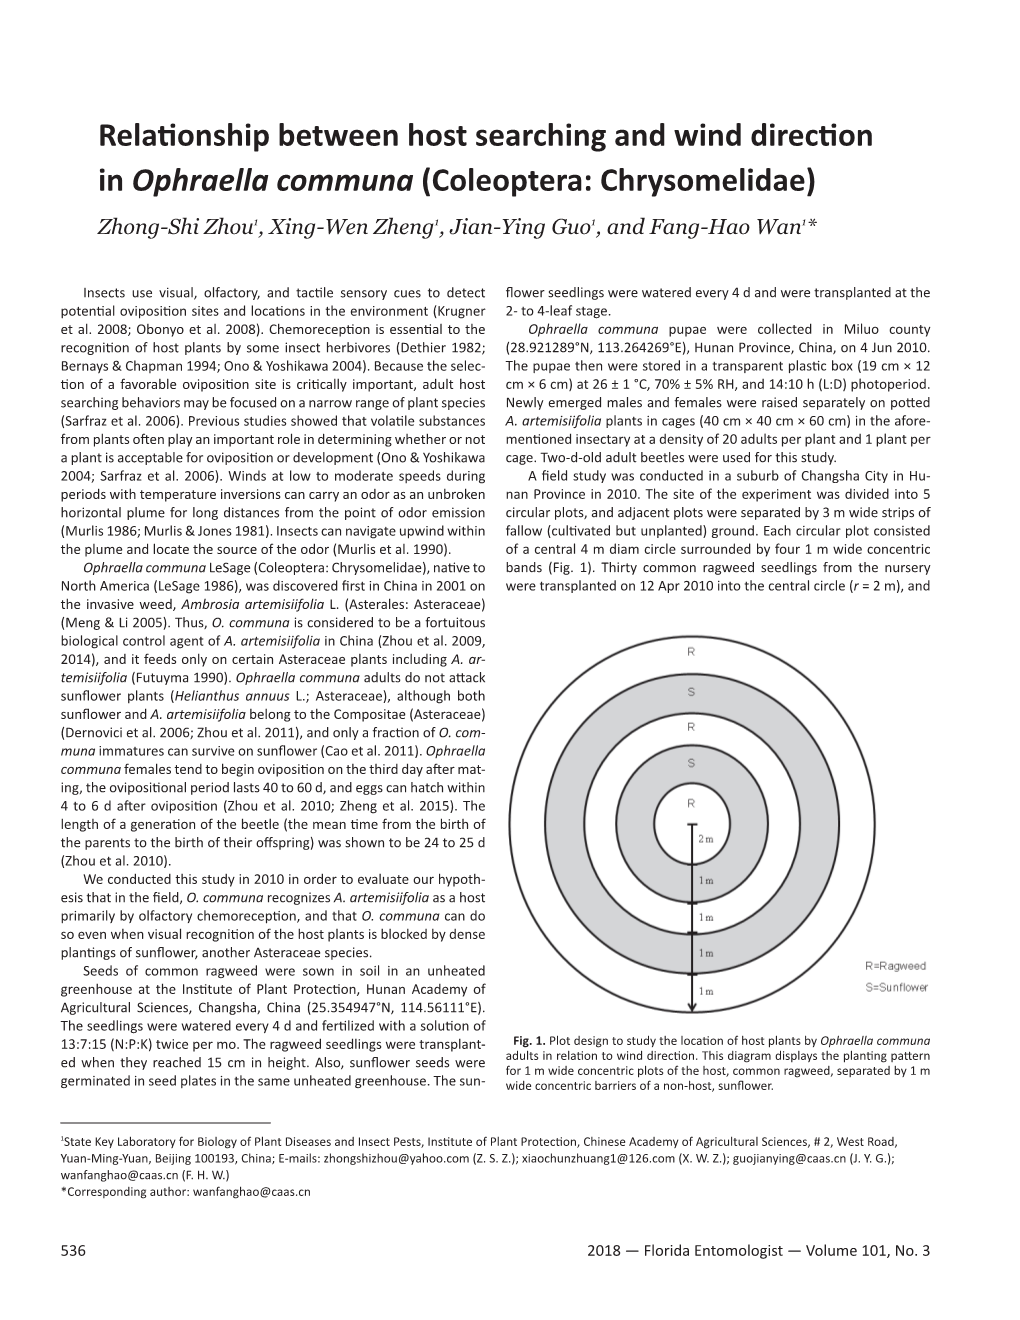 Relationship Between Host Searching and Wind Direction in Ophraella Communa (Coleoptera: Chrysomelidae)